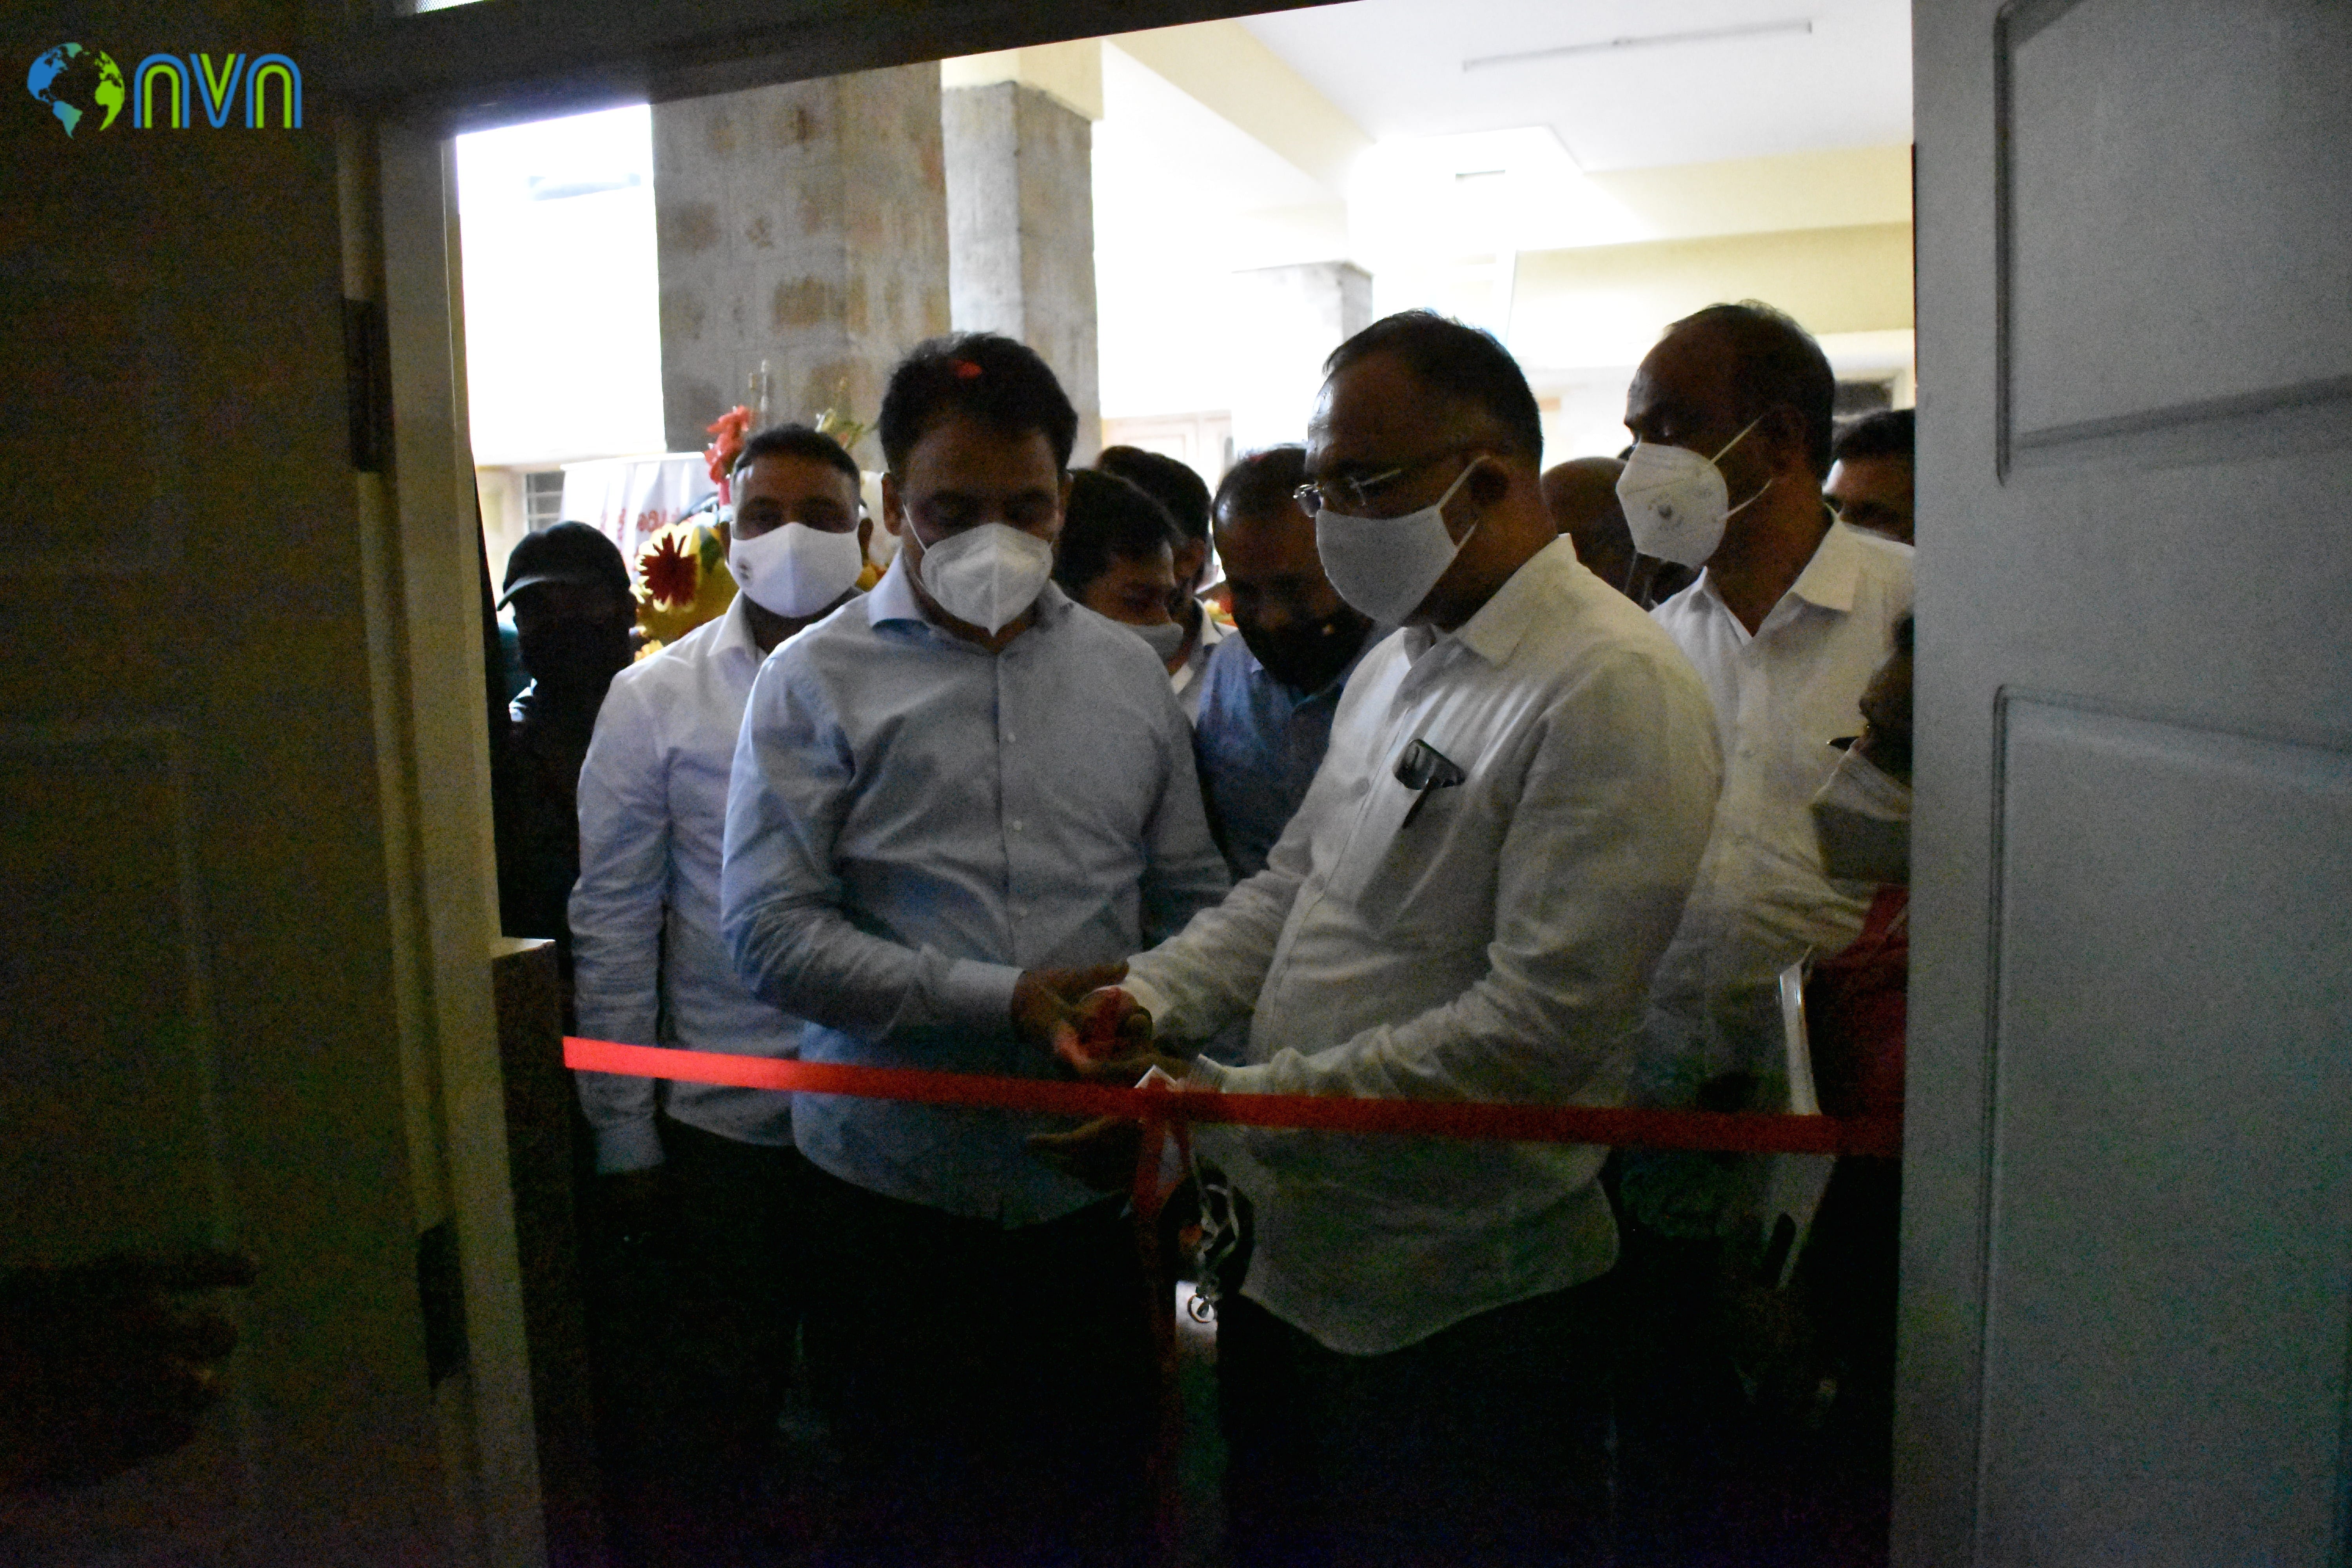 Covid-19 Testing Centre with best-in-class TrueNat machine inaugurated by Deputy Chief Minister Dr. Ashwath Narayan